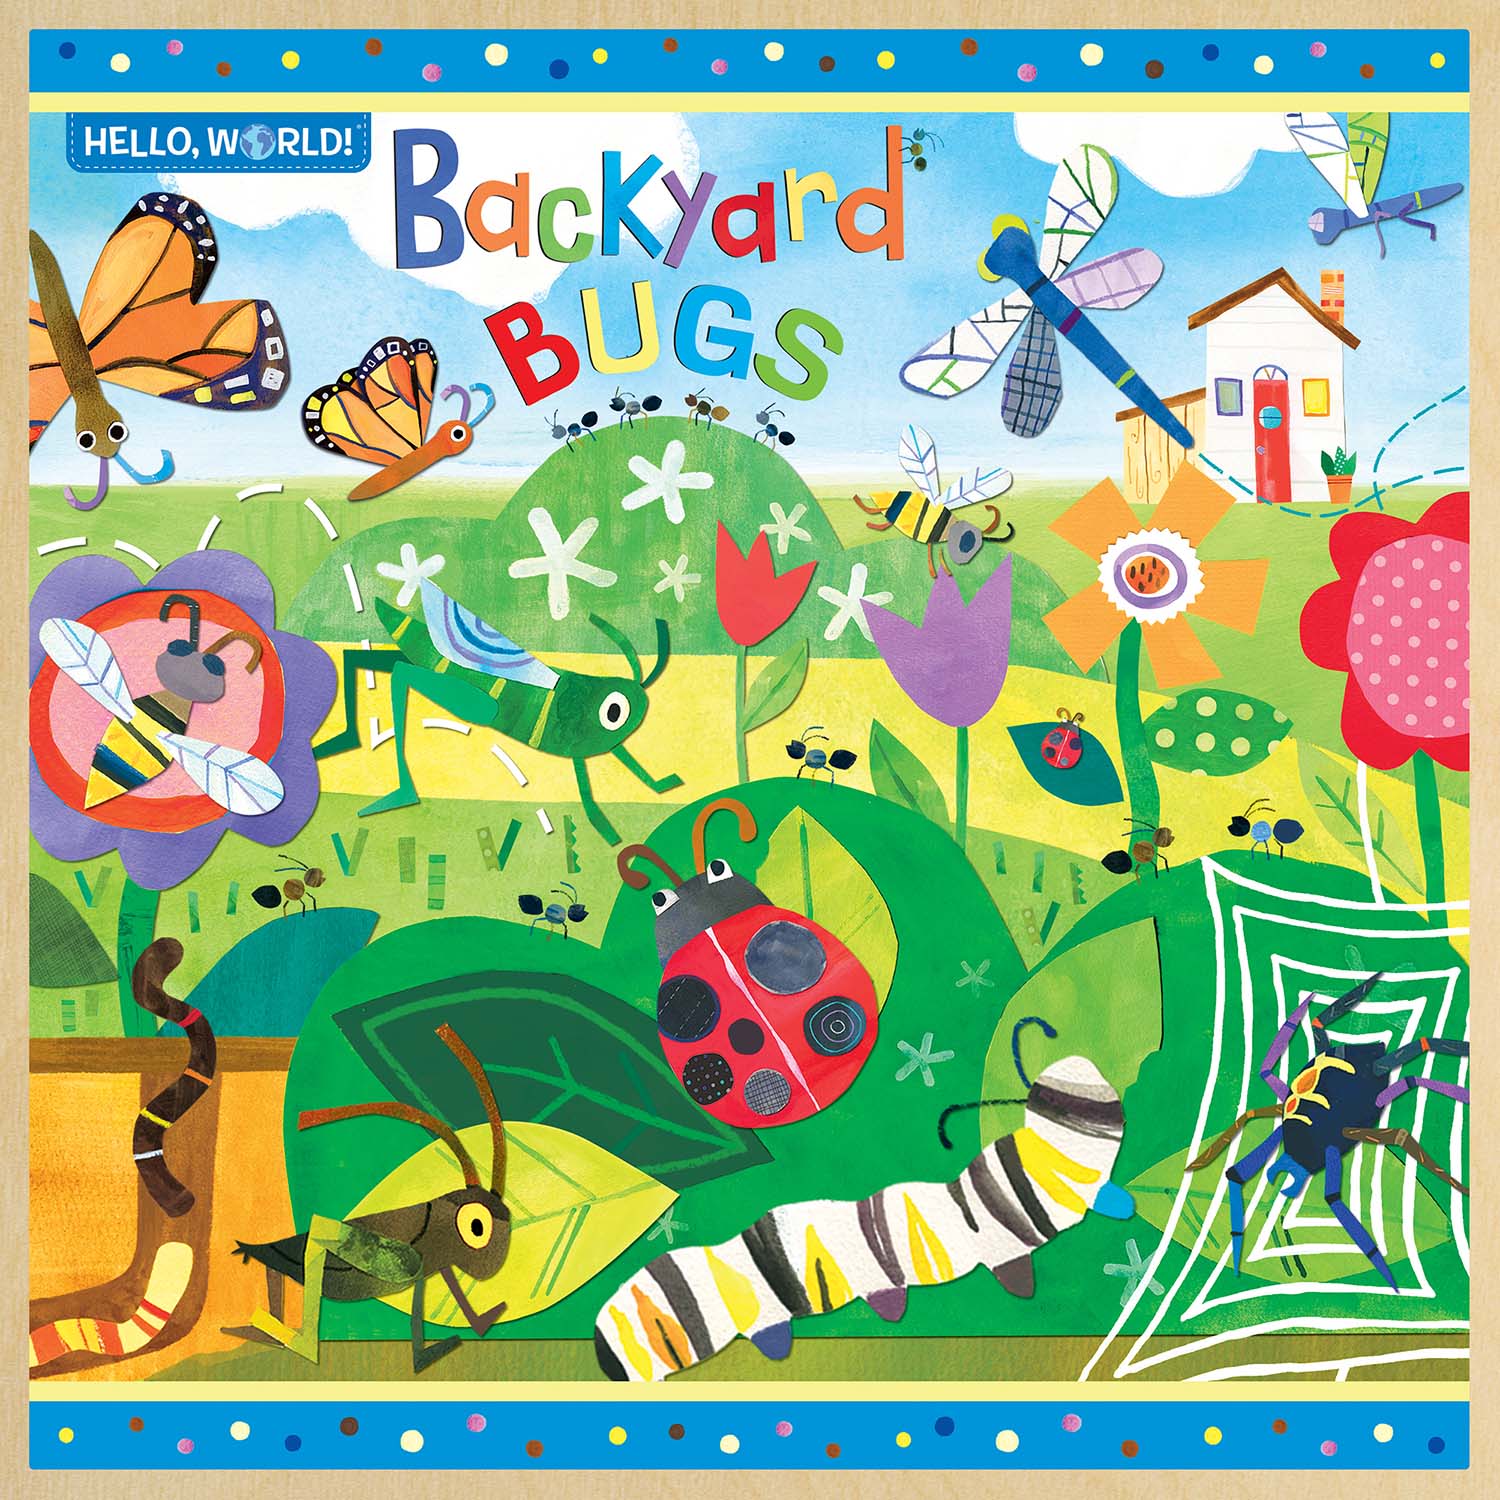 Hello, World! - Backyard Bugs Butterflies and Insects Tray Puzzle